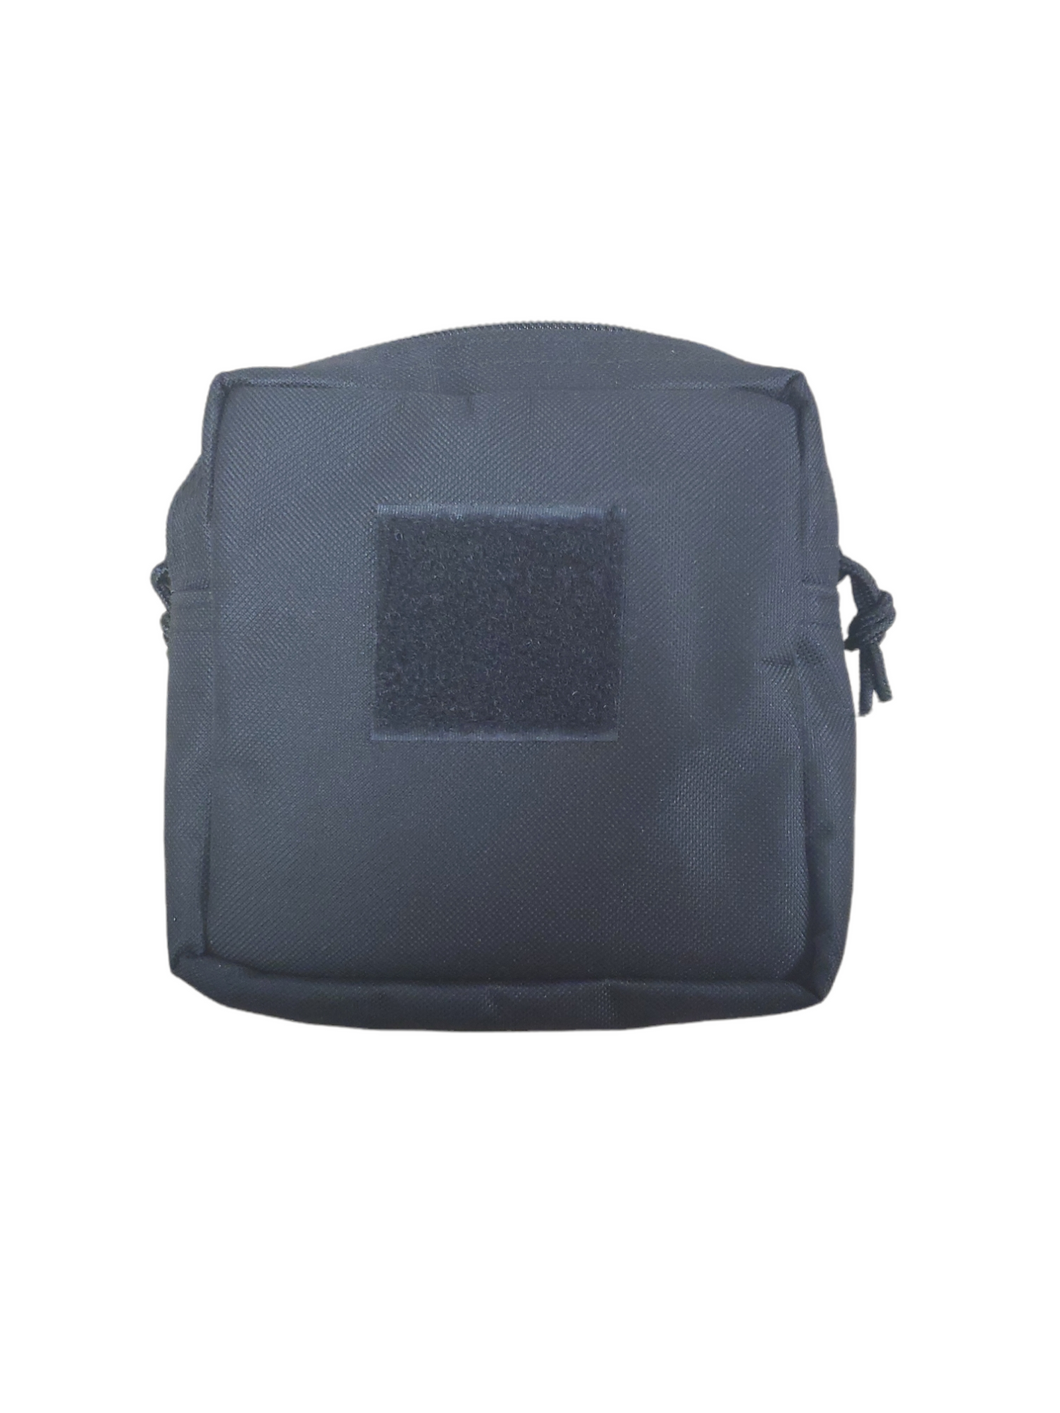 Small MOLLE pouch